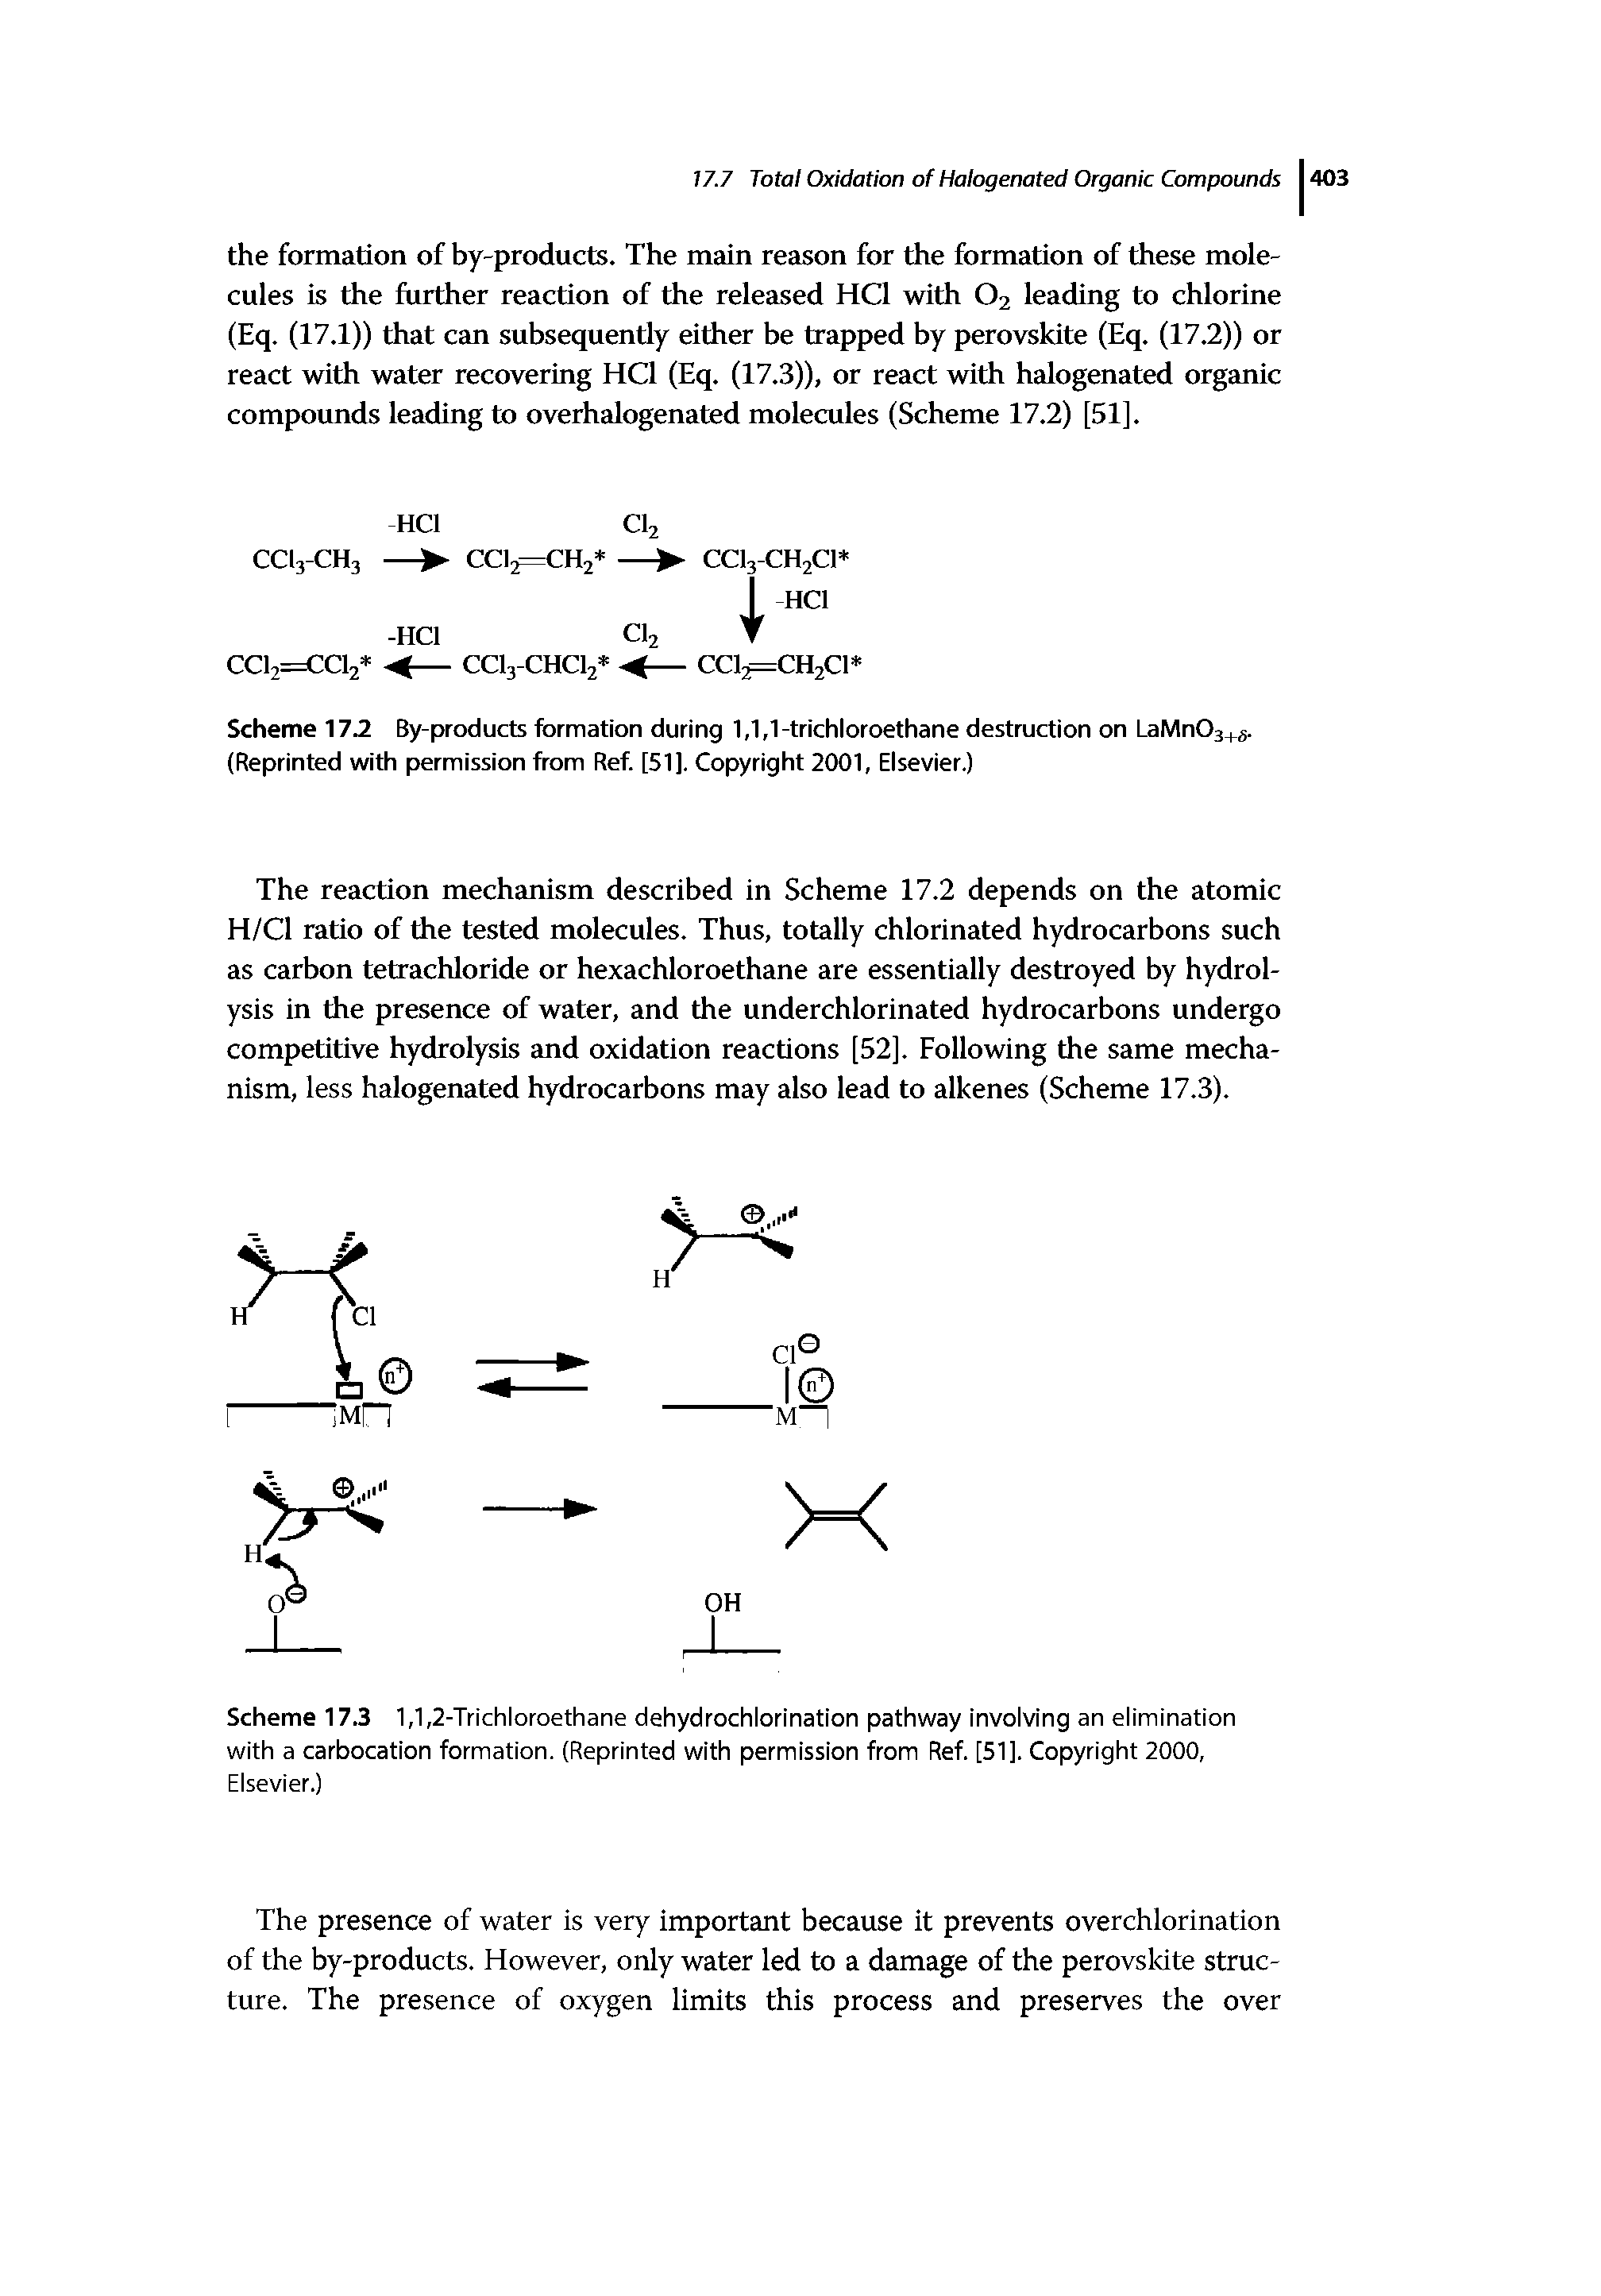 Scheme 17.3 1,1,2-Trichloroethane dehydrochlorination pathway involving an elimination with a carbocation formation. (Reprinted with permission from Ref. [SI]. Copyright 2000, Elsevier.)...